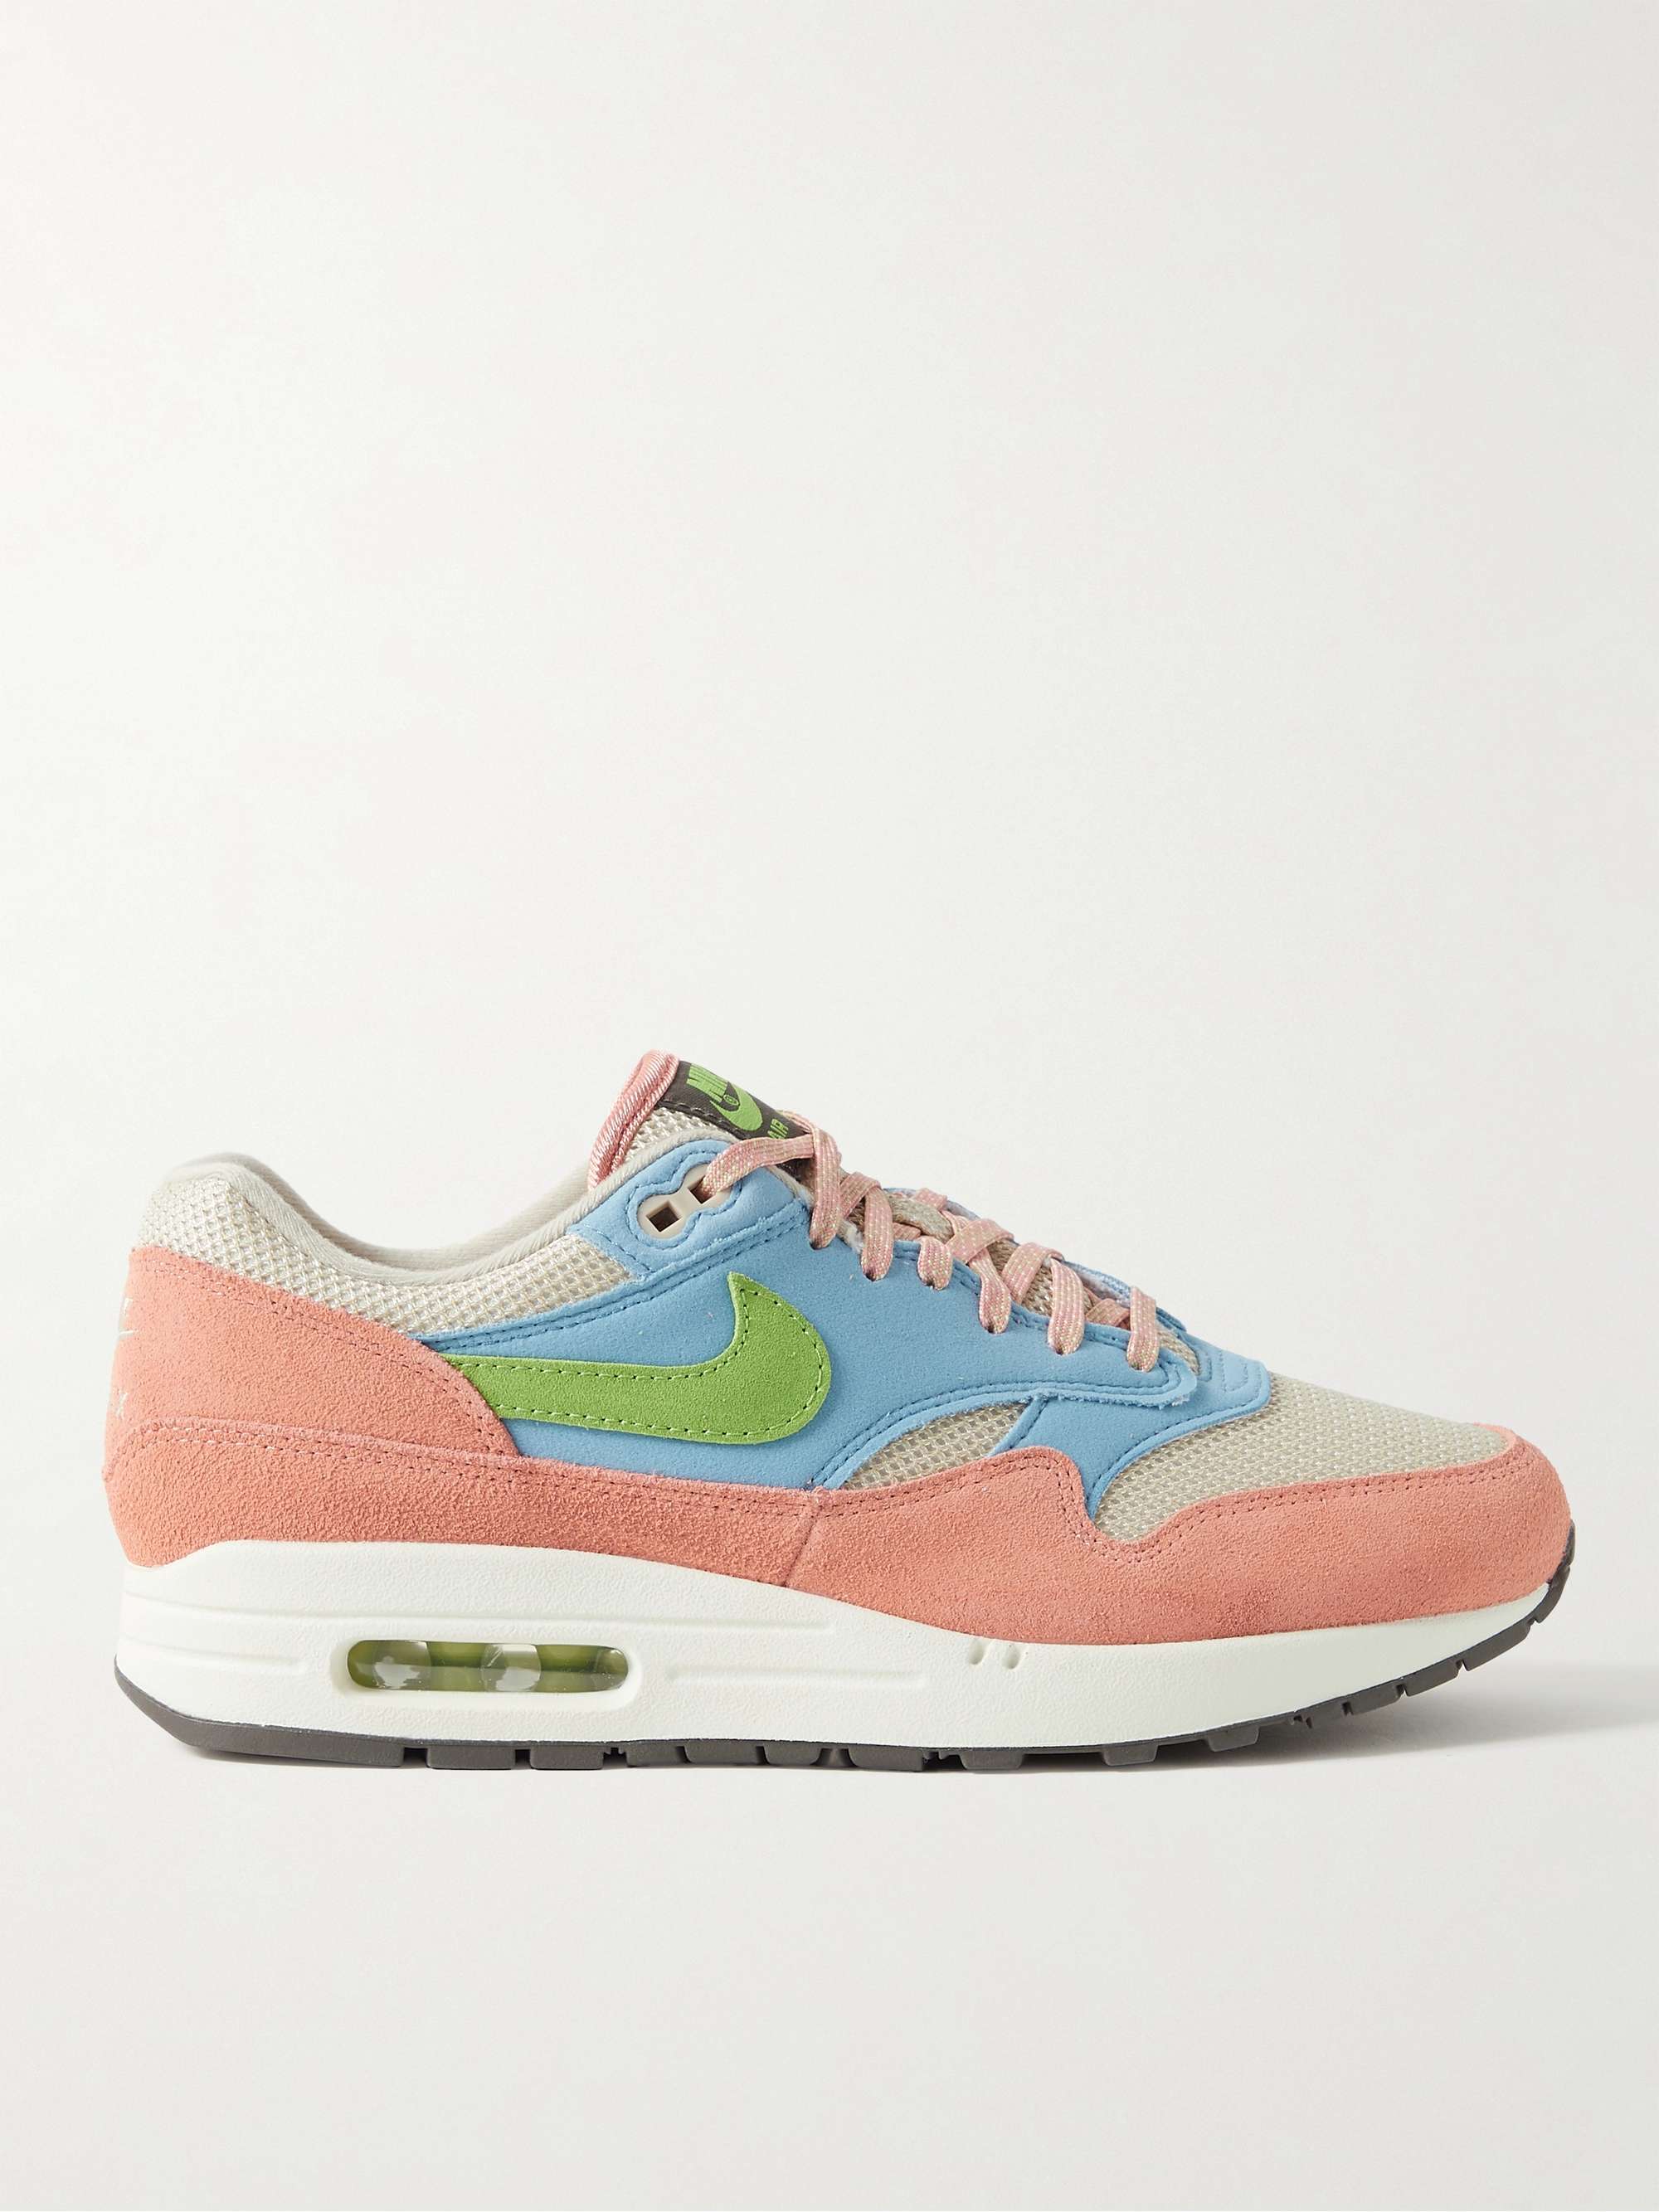 Ship shape aloud Prove Pink Air Max 1 Mesh, Felt and Suede Sneakers | NIKE | MR PORTER